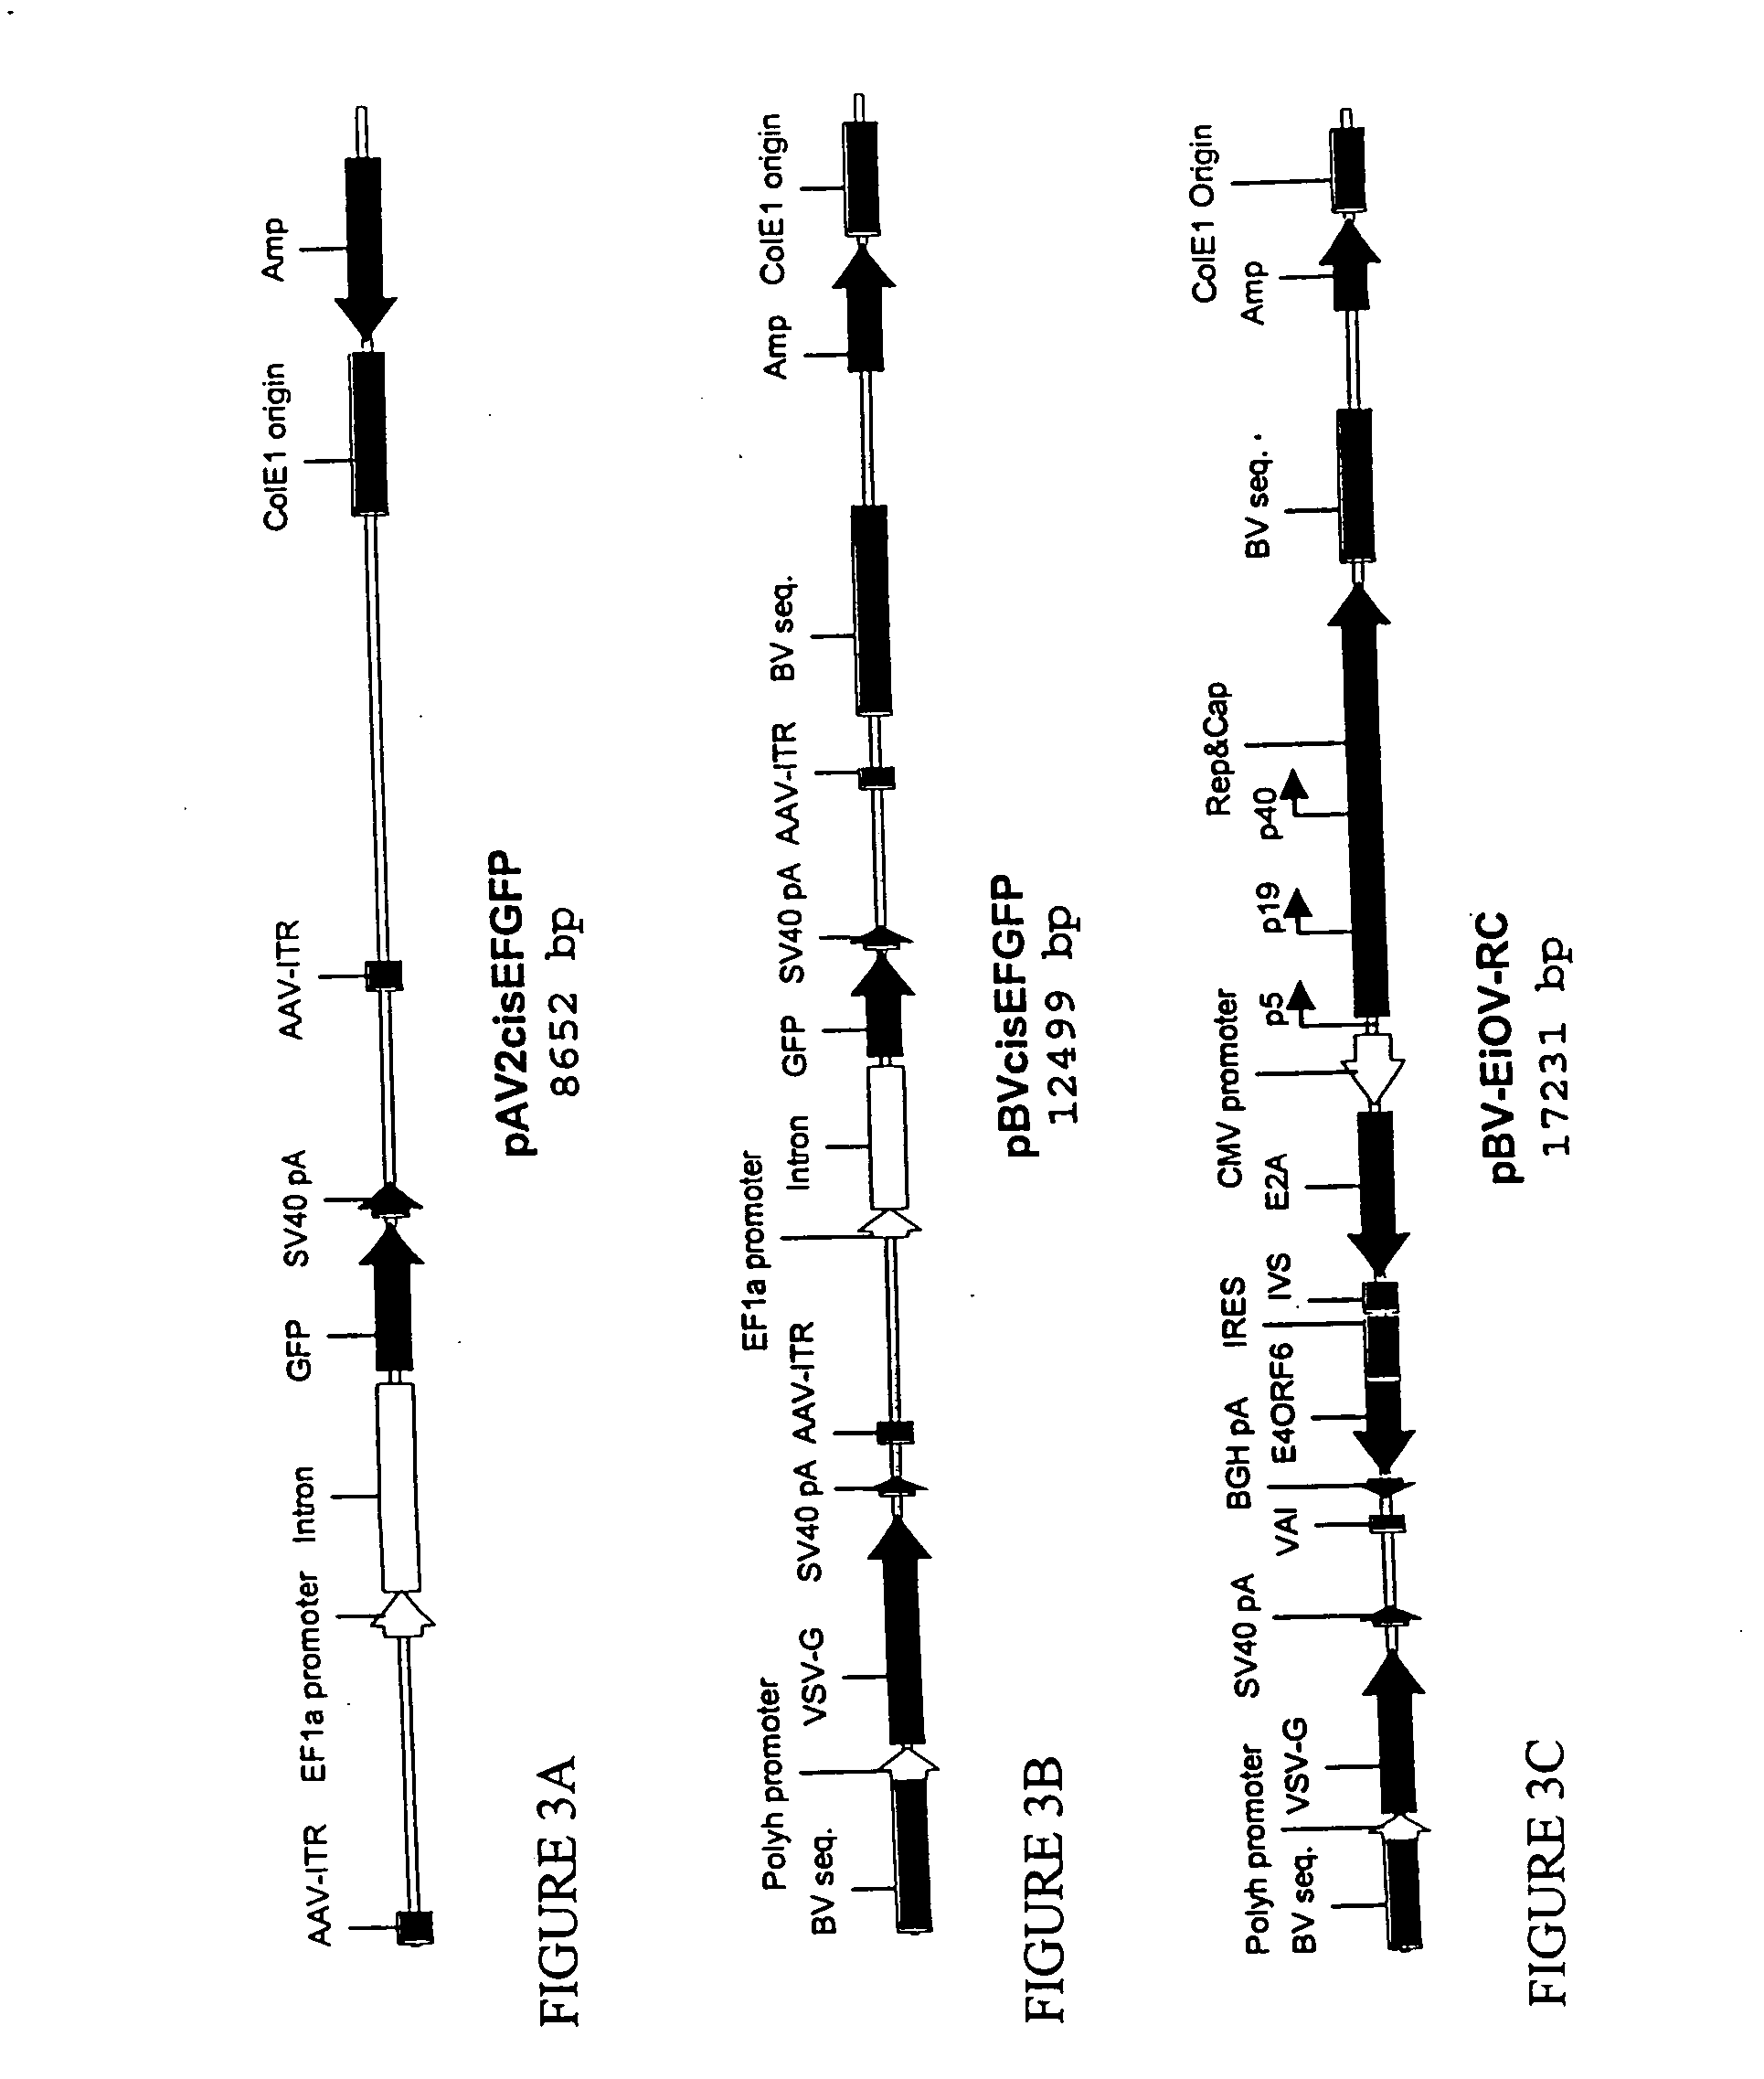 Novel compositions and methods for production of recombinant virus